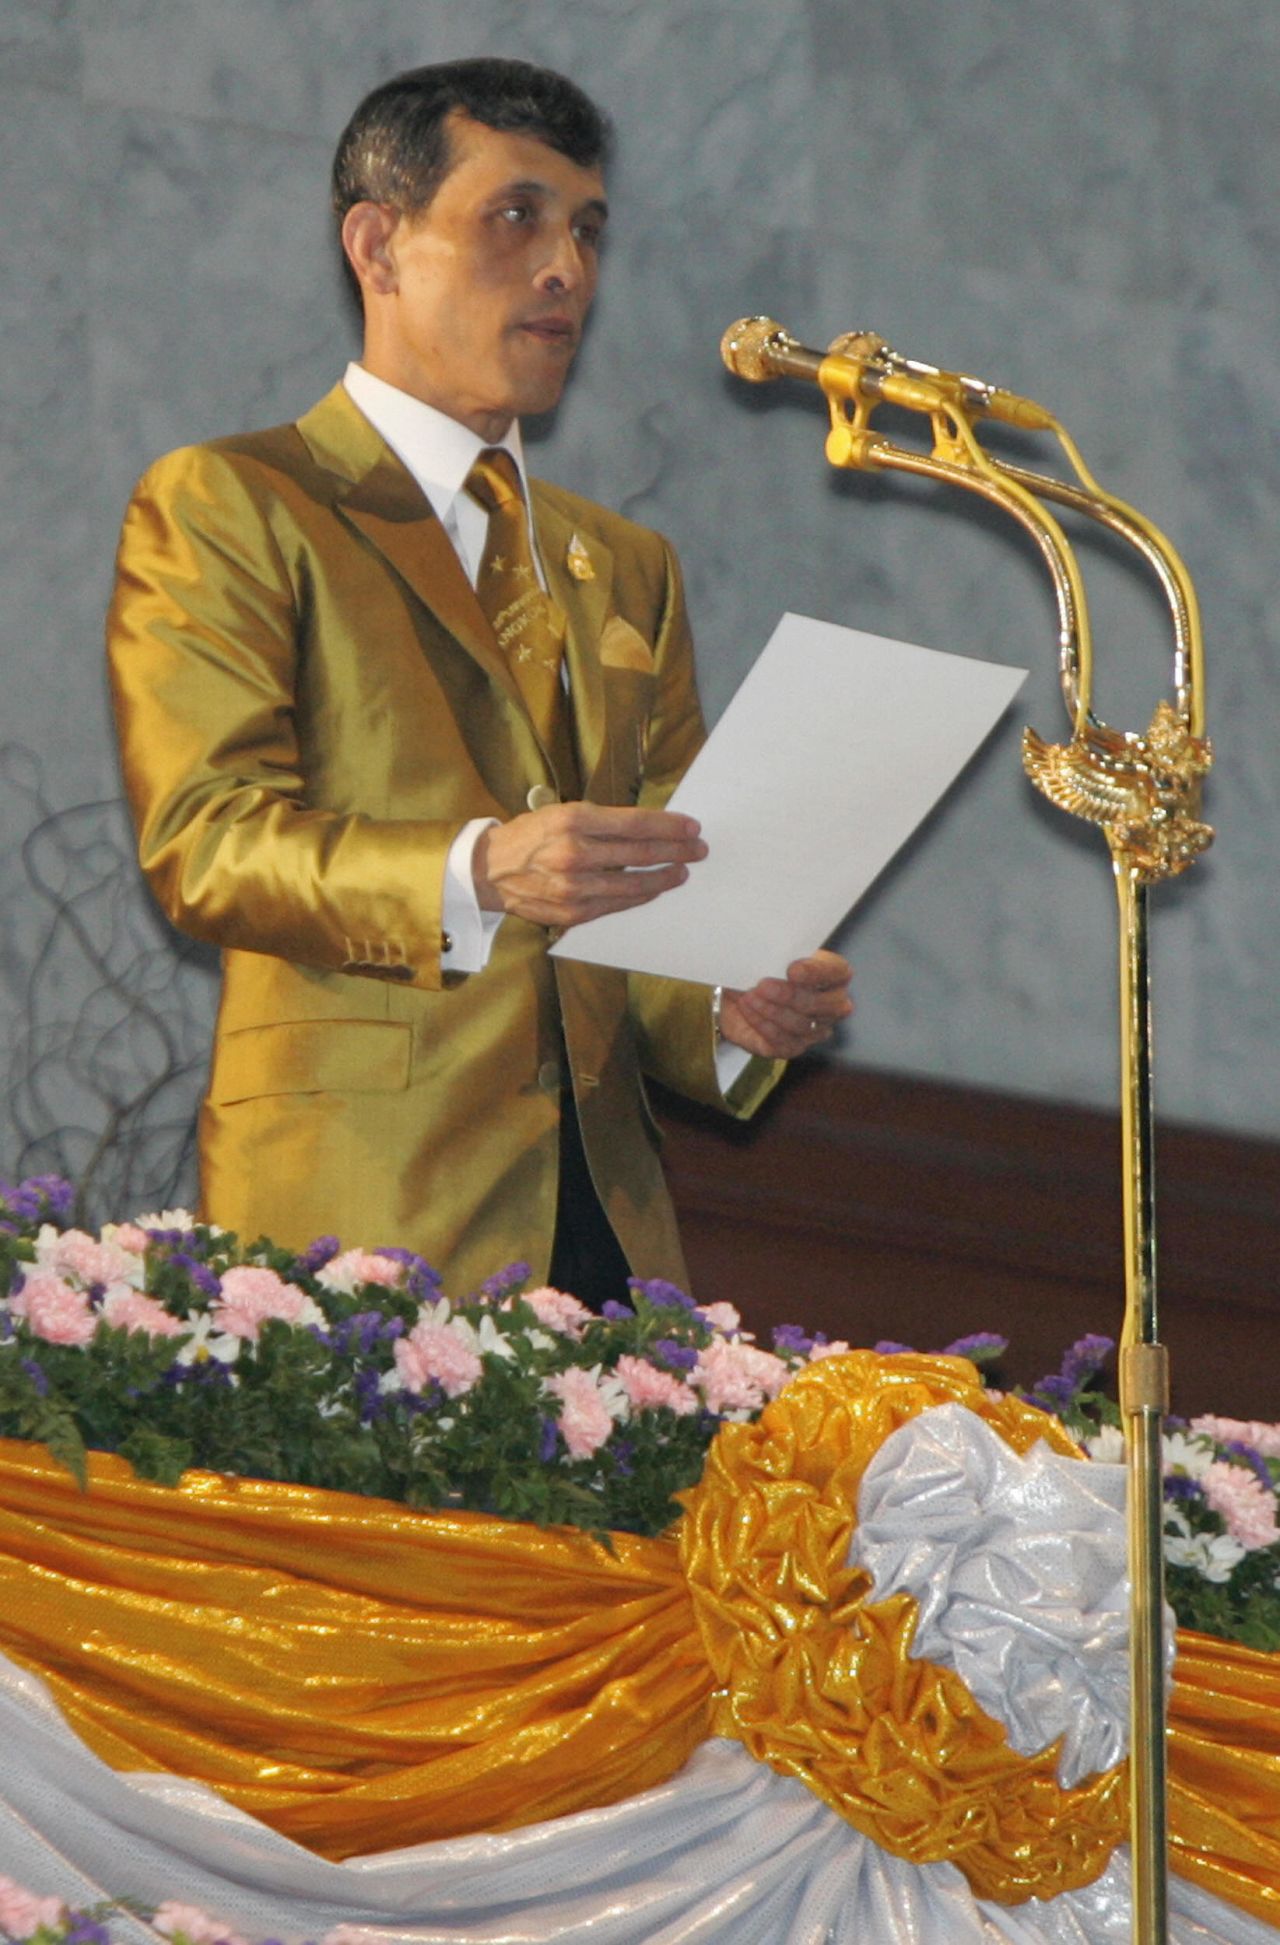 Vajiralongkorn reads a statement during the opening ceremony of the Universiade, an international sports competition that was held in Bangkok in 2007.